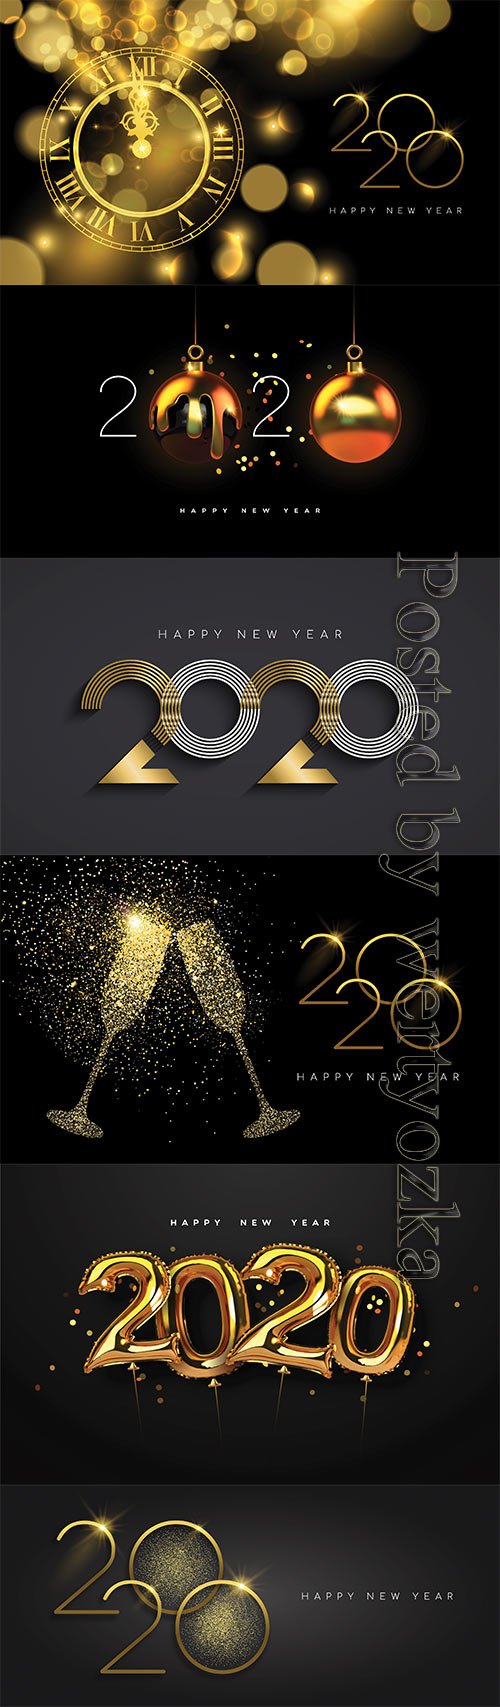 Happy New Year 2020 gold midnight clock party card